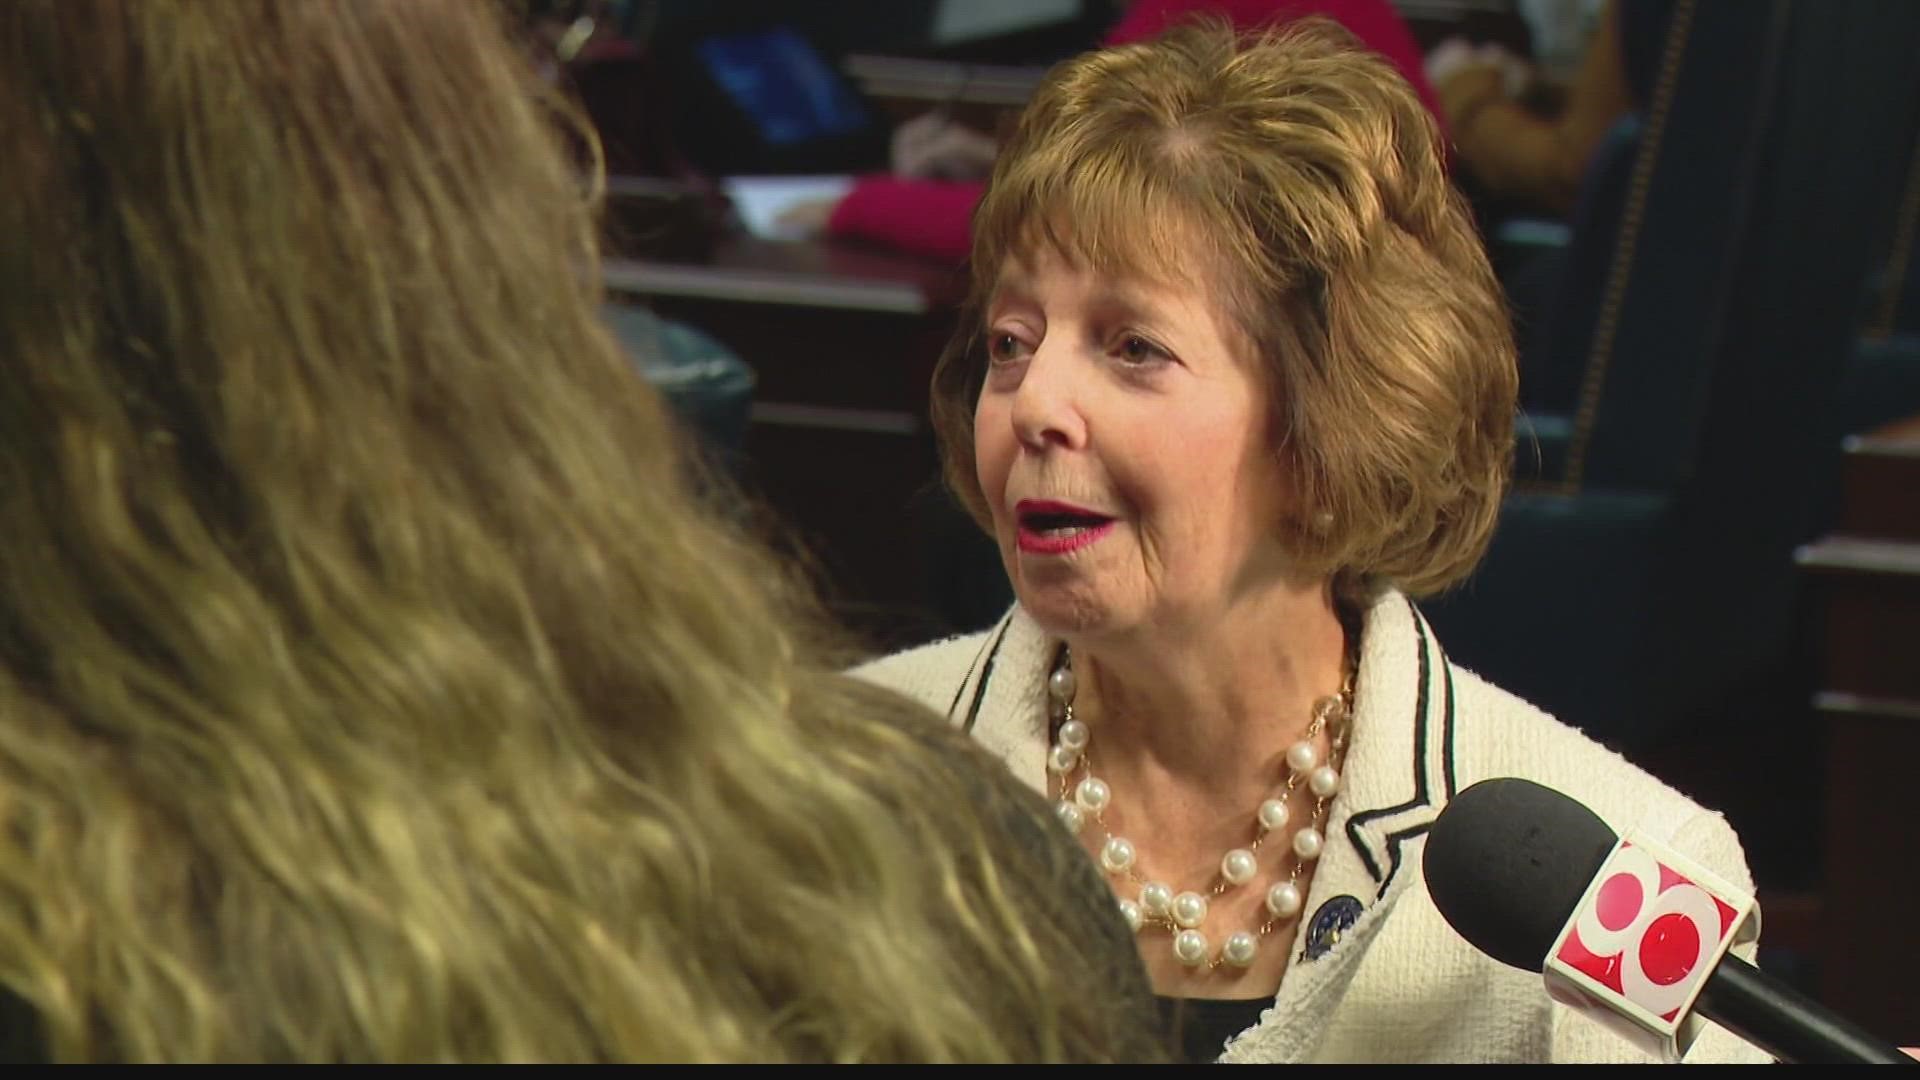 13Investigates spoke with Senator Linda Rogers to try and get clarification on what HB 1134.